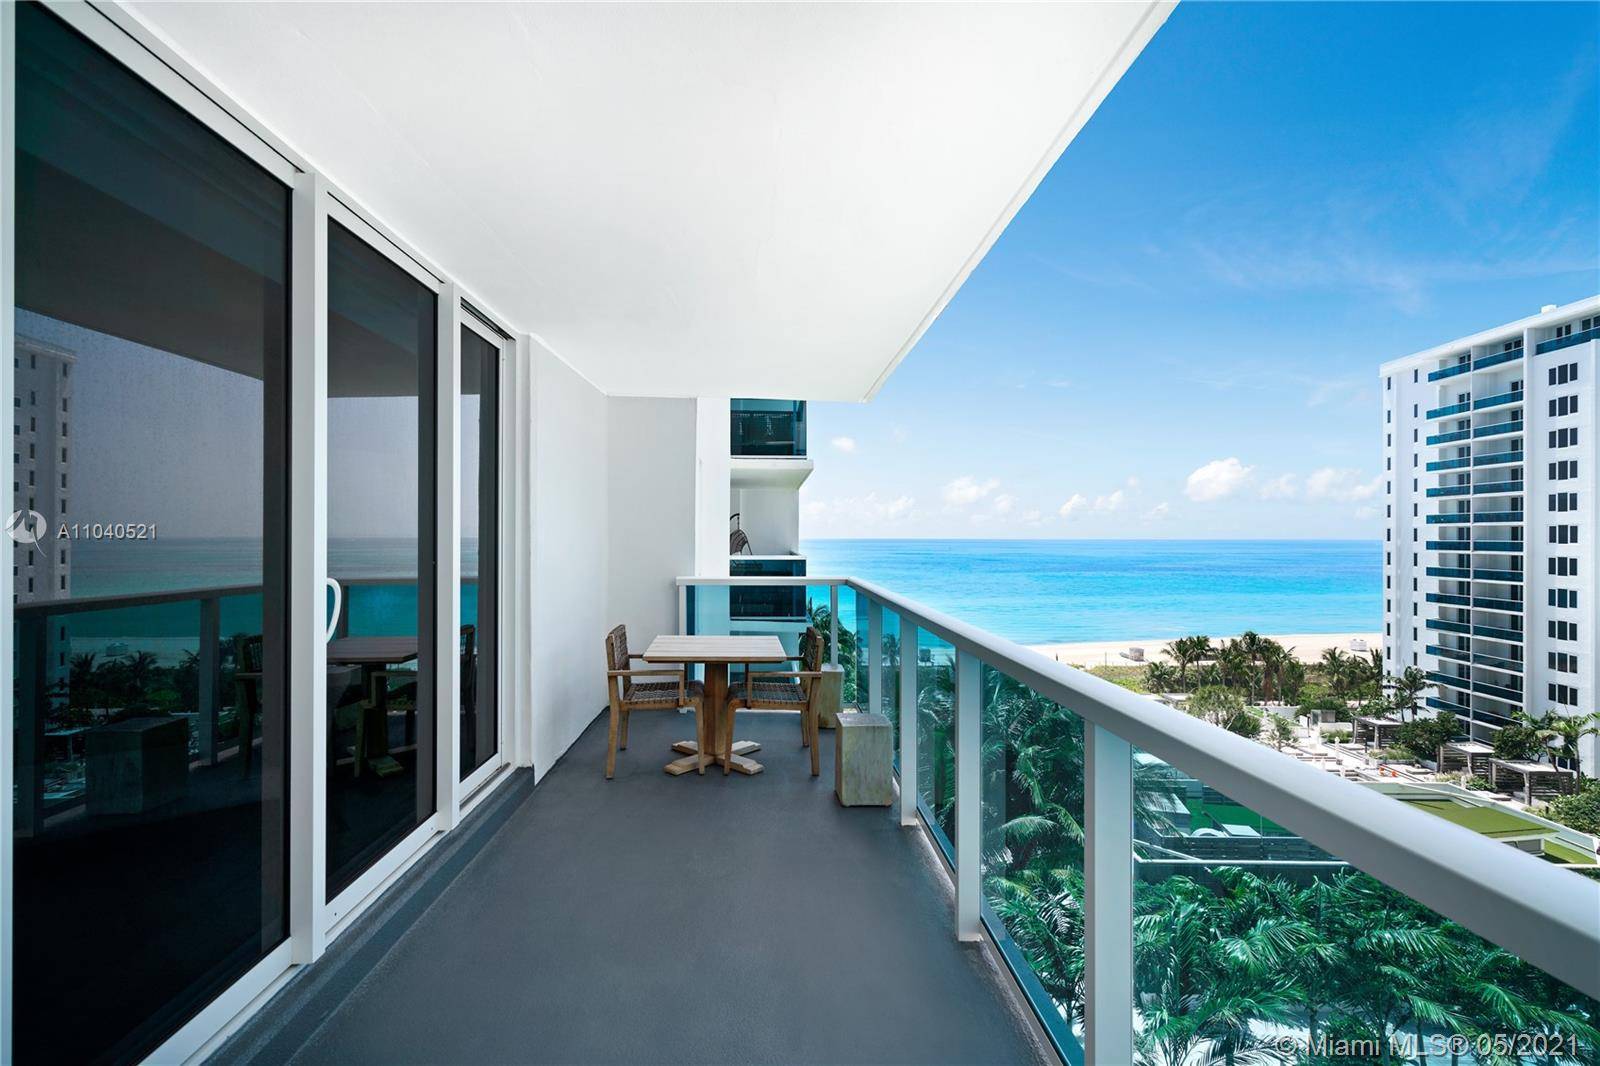 Experience 5 star resort living at 1 Hotel in Miami Beach !